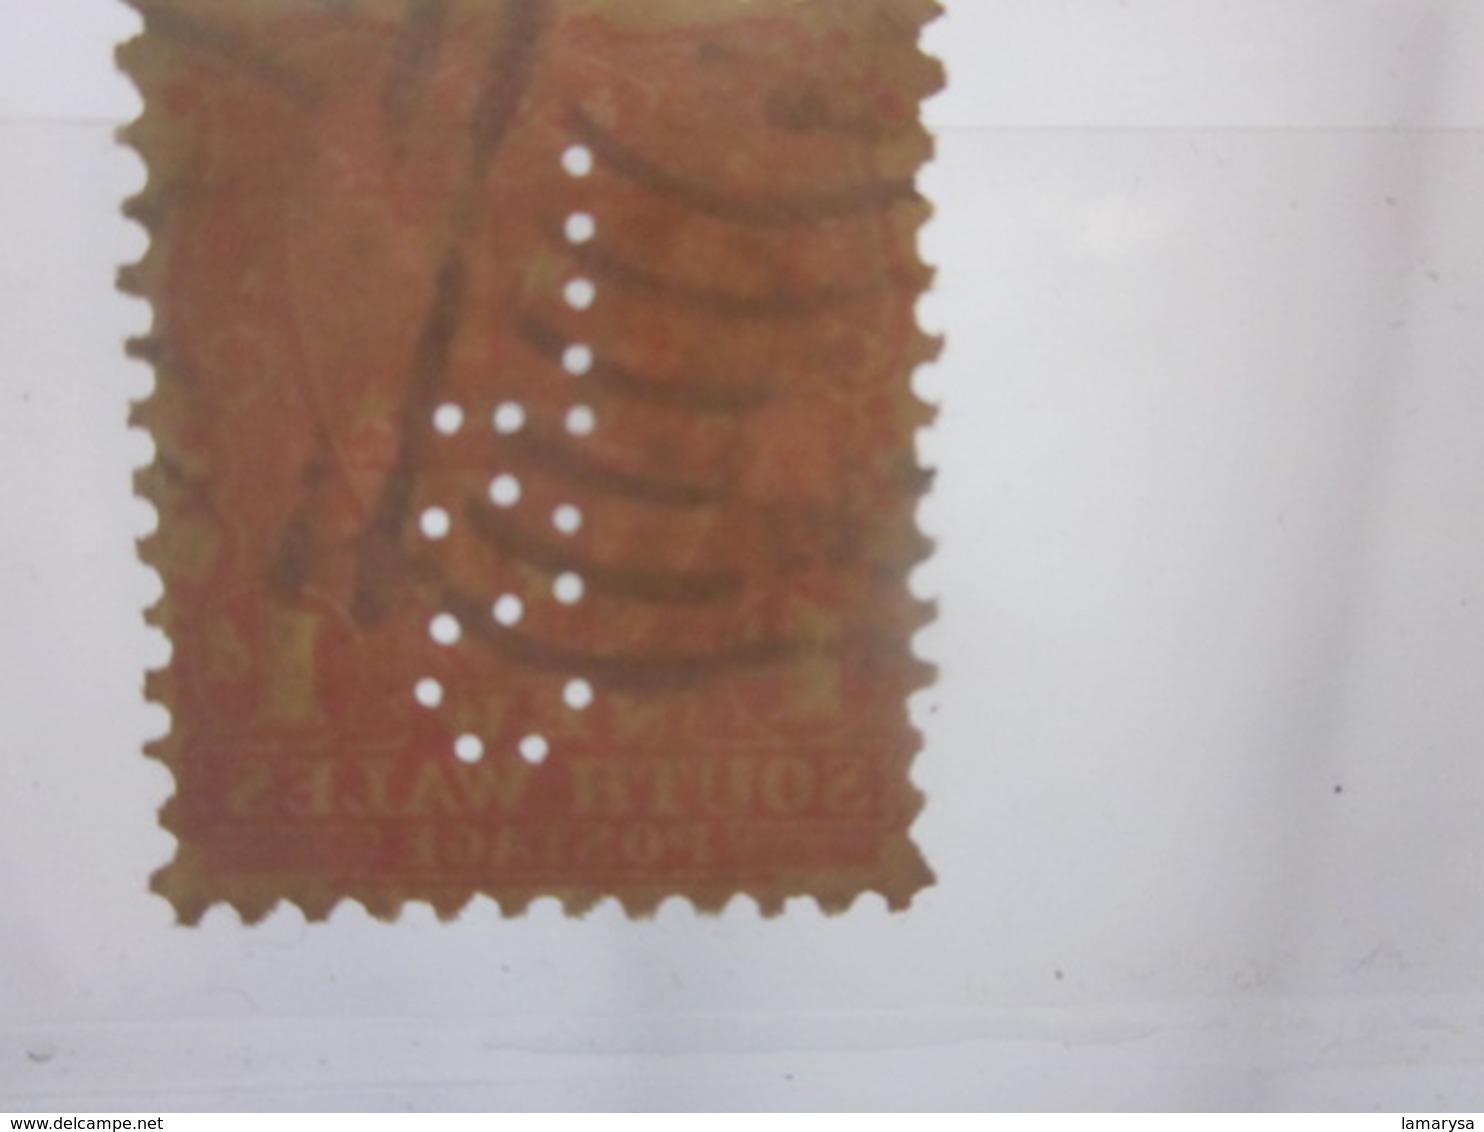 Stamp Timbre AUSTRALIE COLONY NEW SOUTH WALES Perforés Perforé Perforés Perfin Perfins Stamps Perforated Perforations LS - Perfins